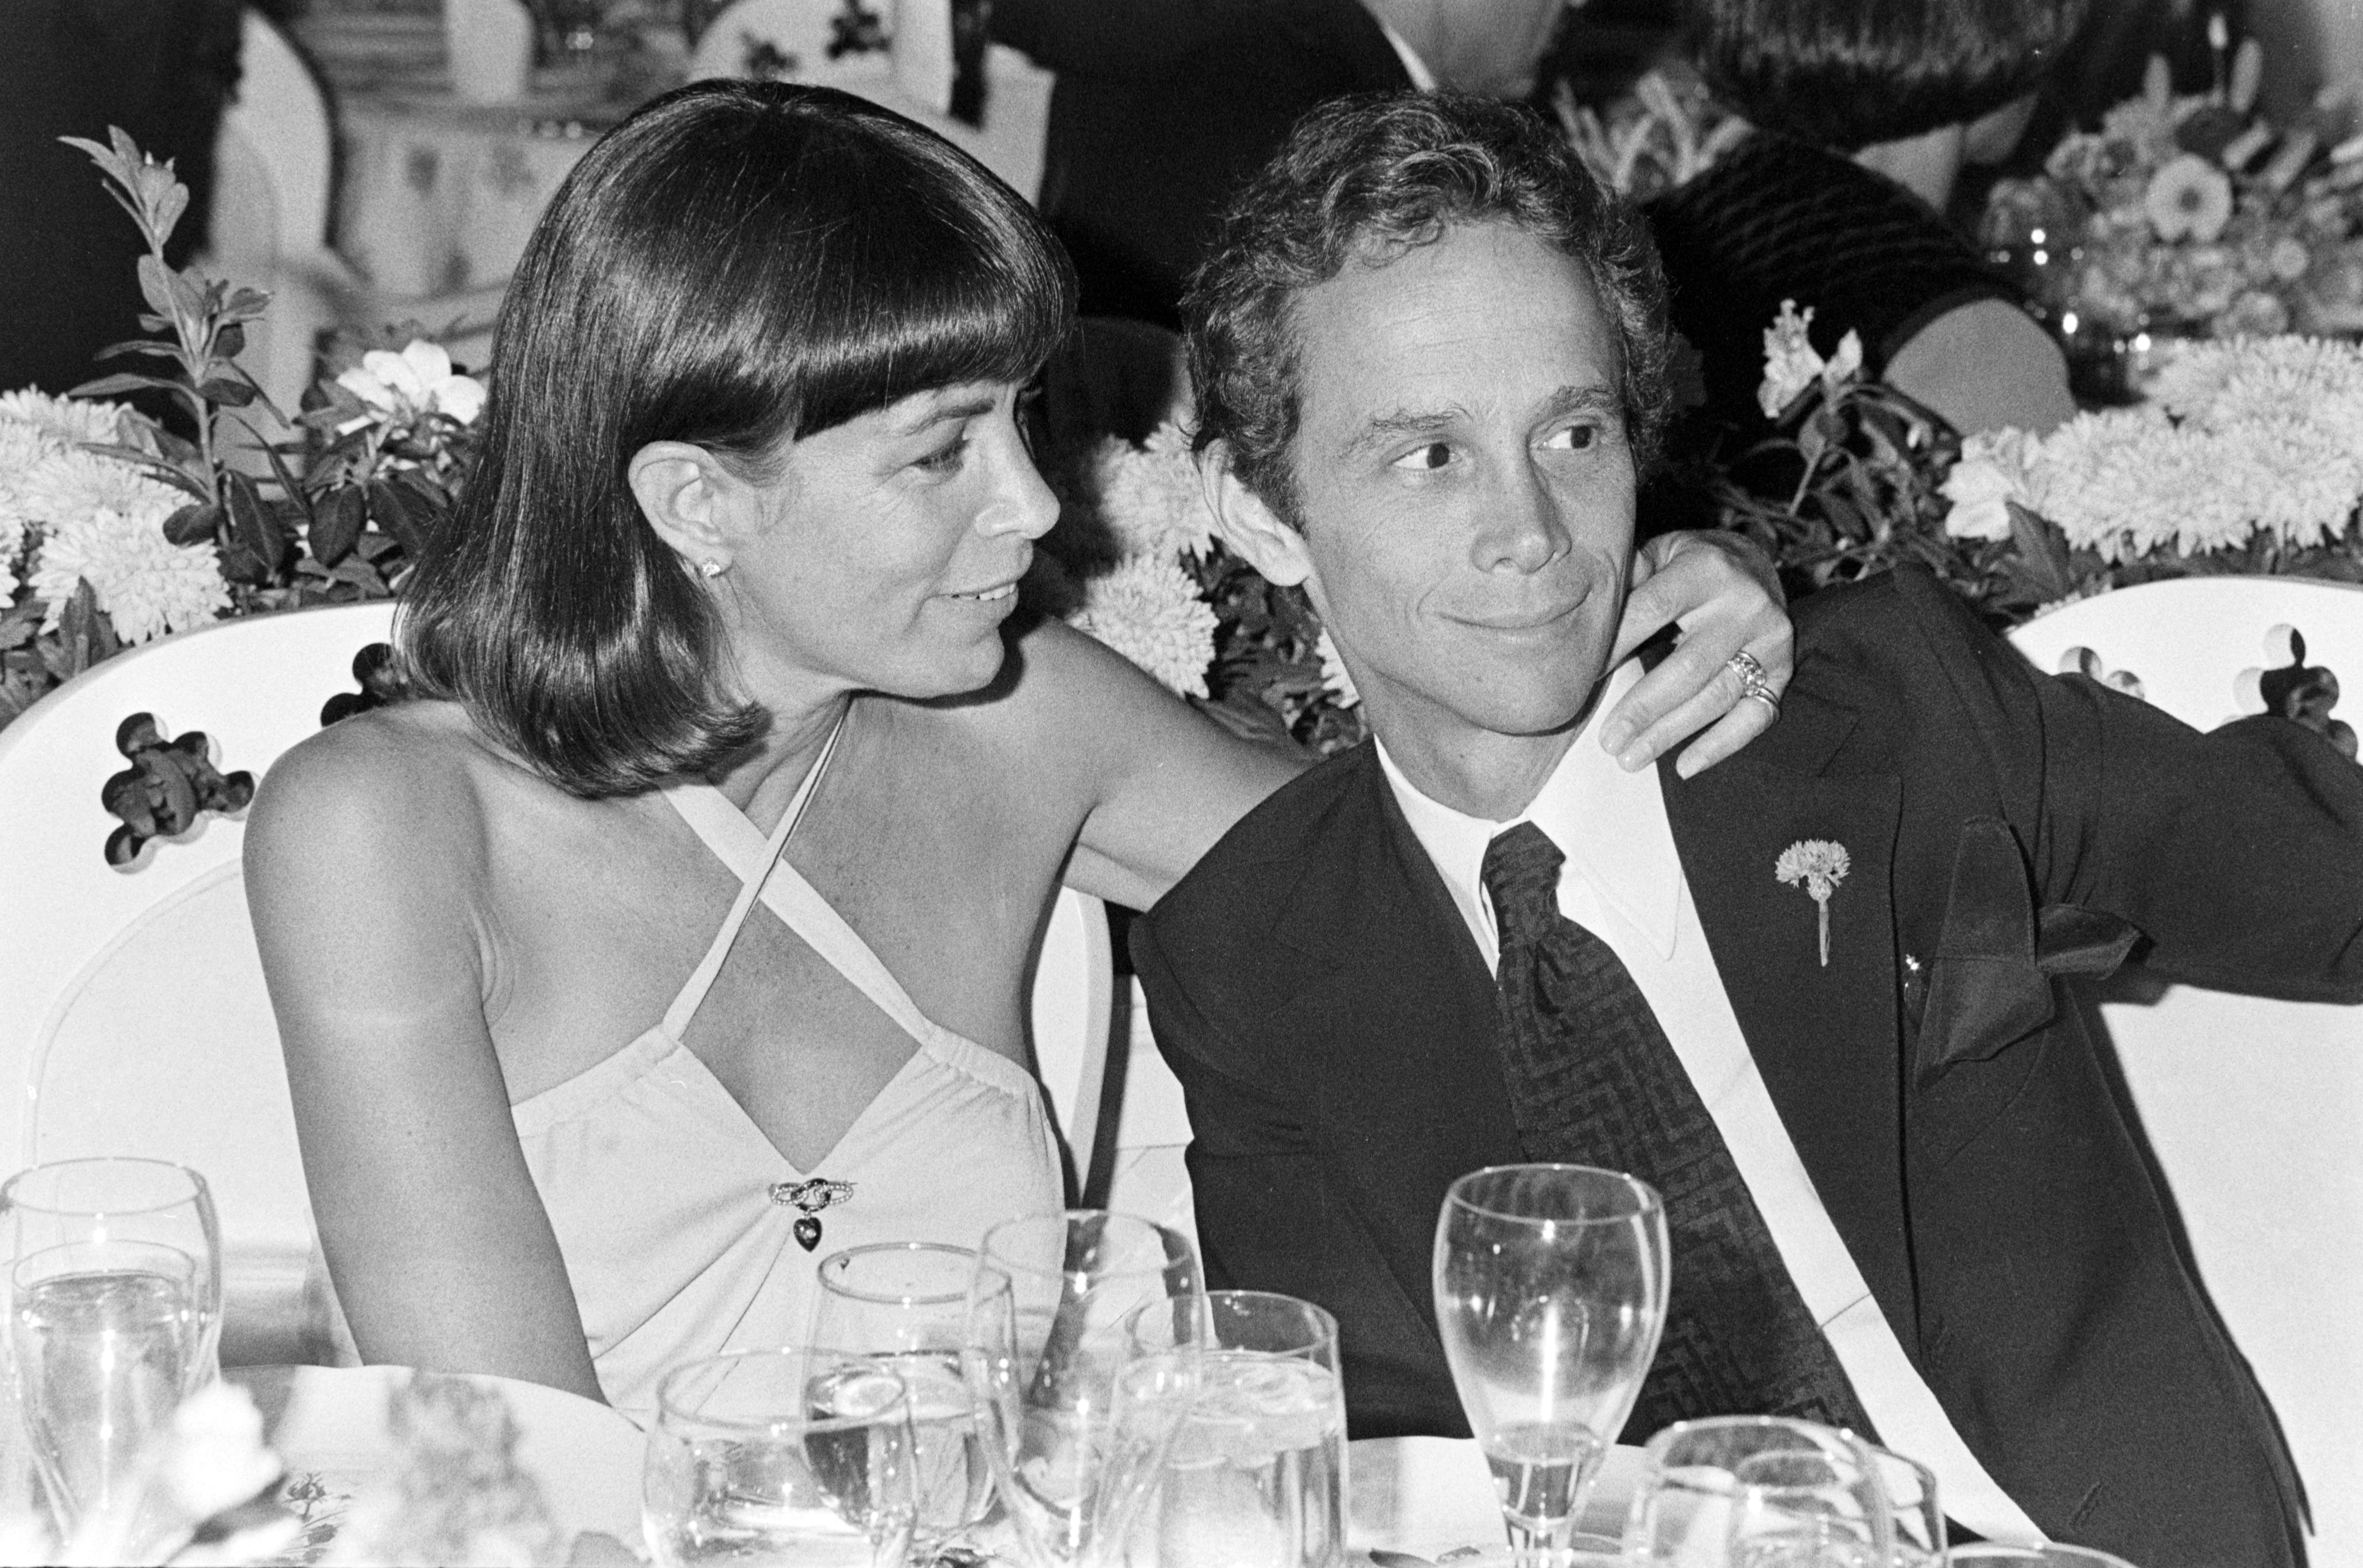 Jo Wilder and Joel Grey attend a benefit event at Tavern on the Green in New York City on September 13, 1976. | Source: Getty Images